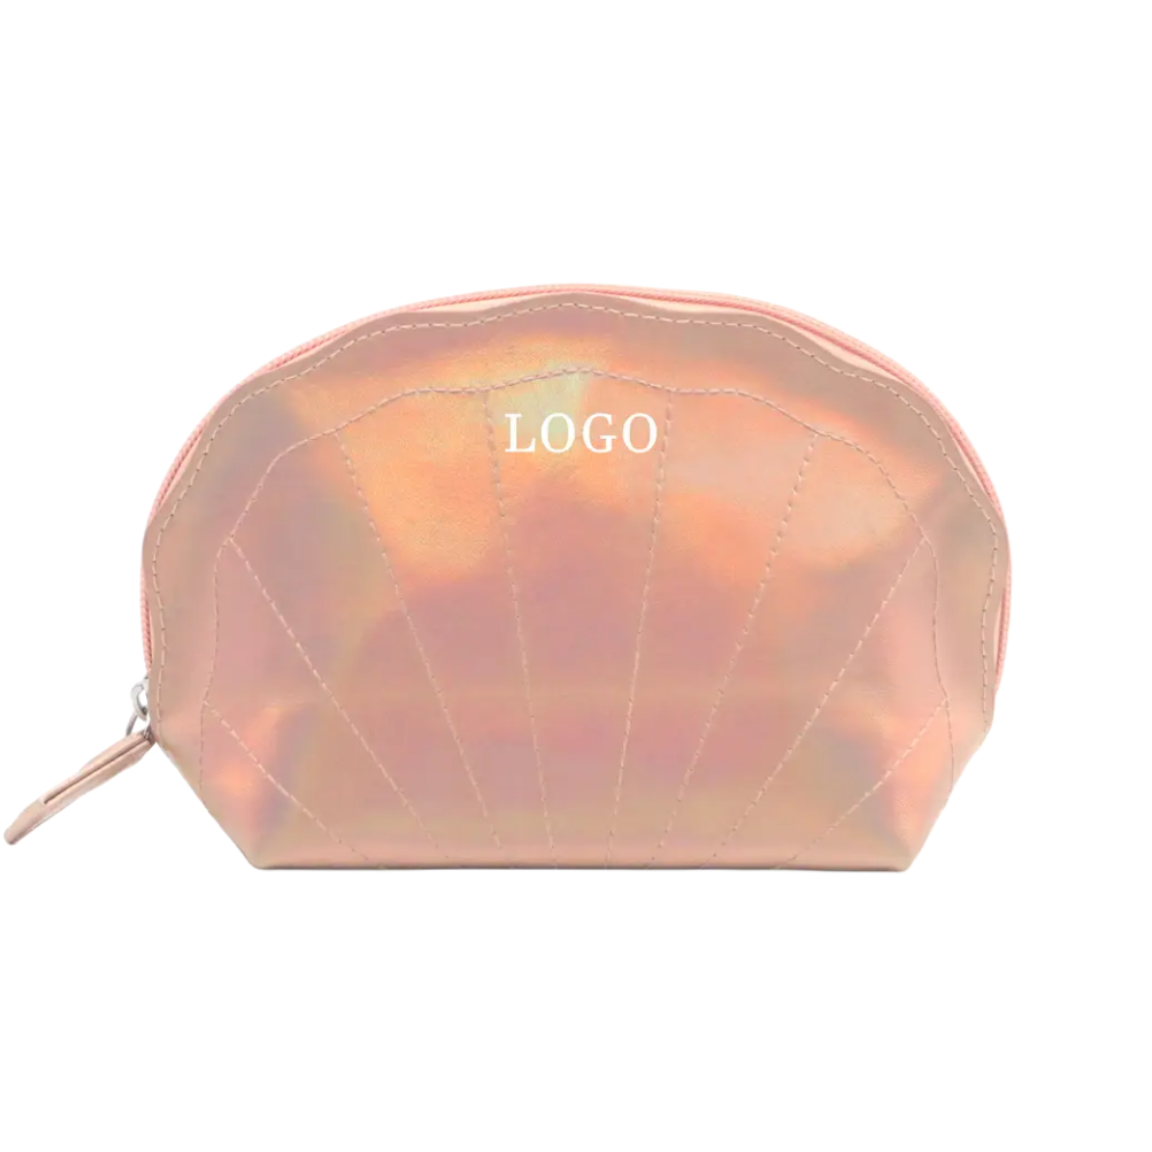 New Product Unique Design Apricot Holographic PU Cosmetic Bag Wave-like Top Shell-Shape Apricot Vegan Leather Makeup Zipper Bag